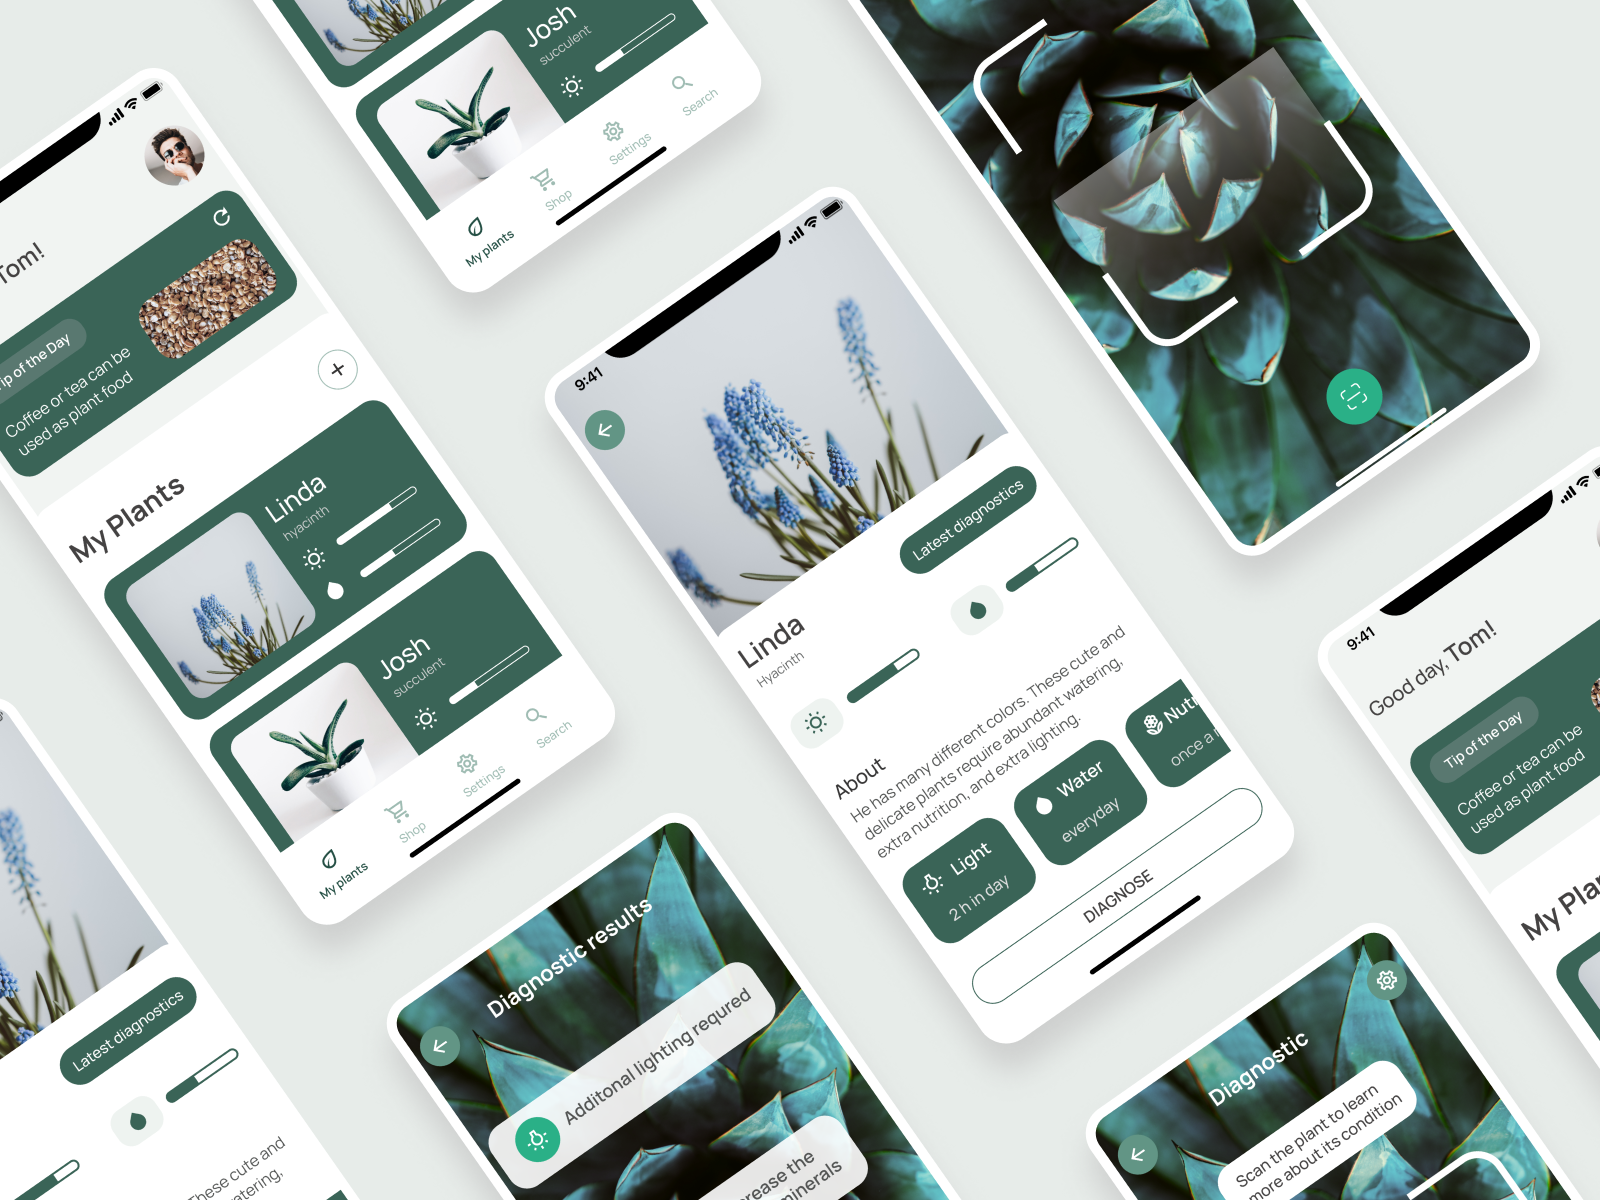 My plant care app by Anna Kushner on Dribbble